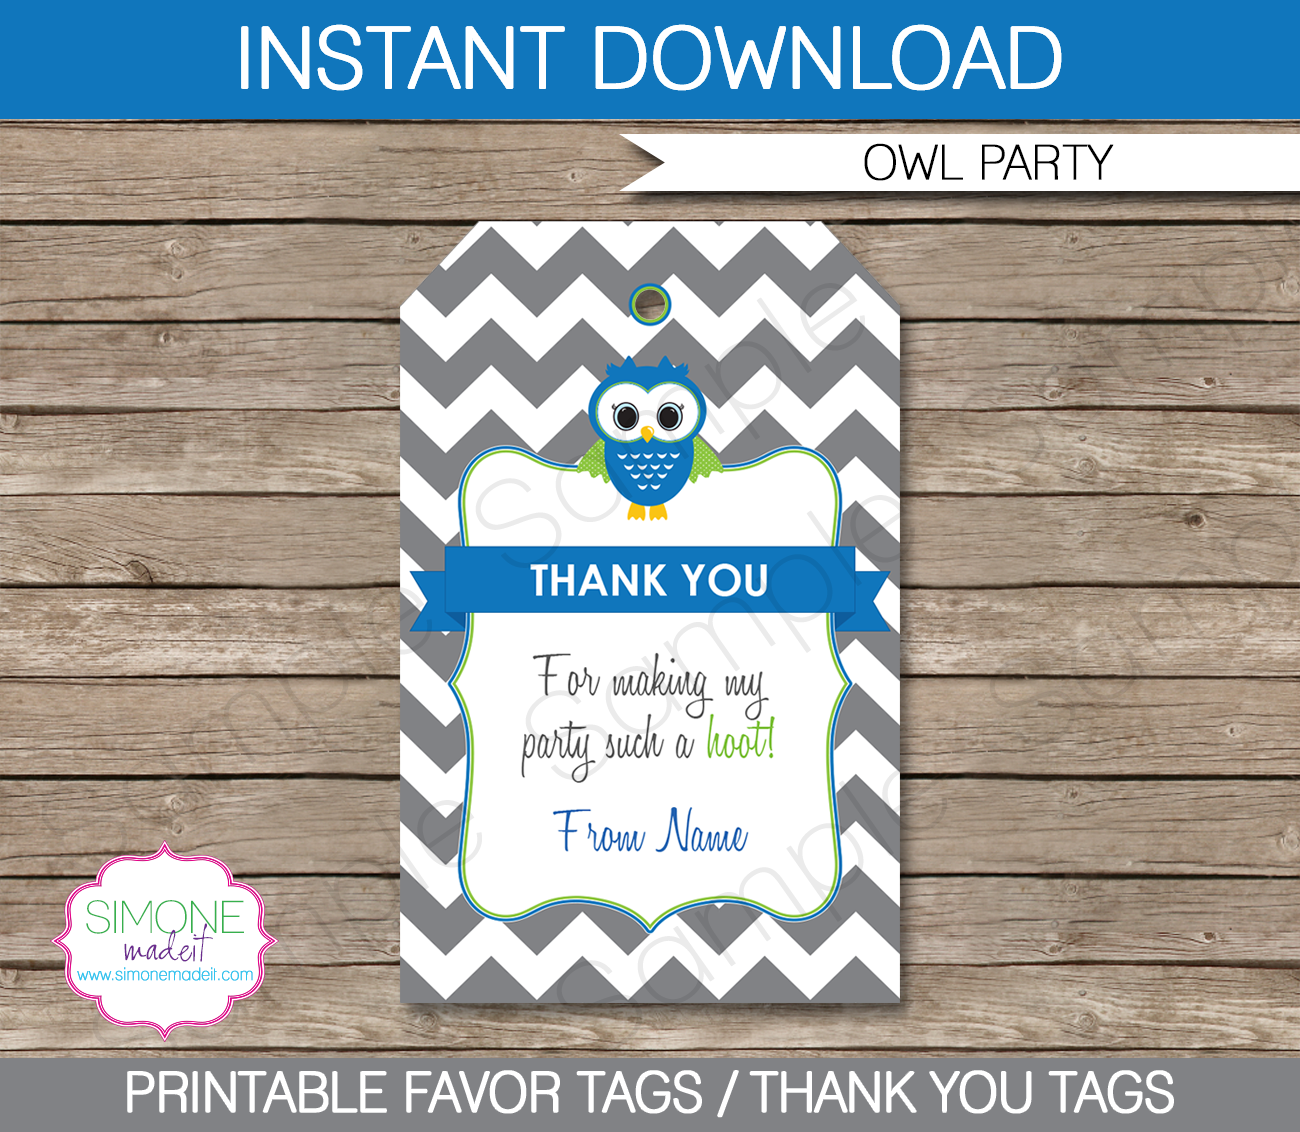 Owl Party Favor Tags | Thank You Tags | Birthday Party | Editable DIY Template | $3.00 INSTANT DOWNLOAD via SIMONEmadeit.com